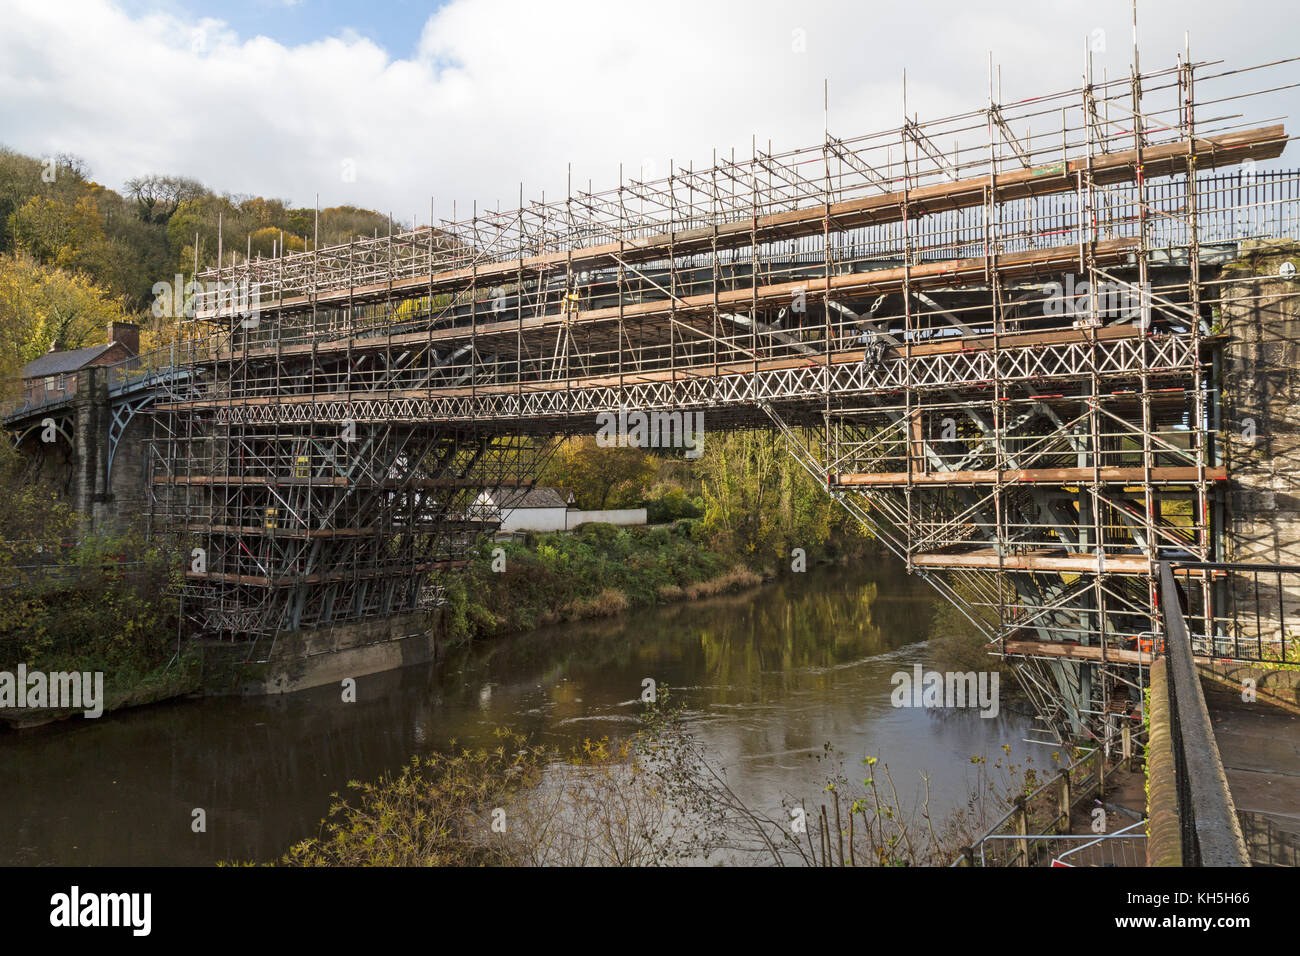 The famous Iron Bridge in the town of Ironbridge in Shropshire, England, covered in scaffolding as part of a £1.2m restoration project, November 2017. Stock Photo